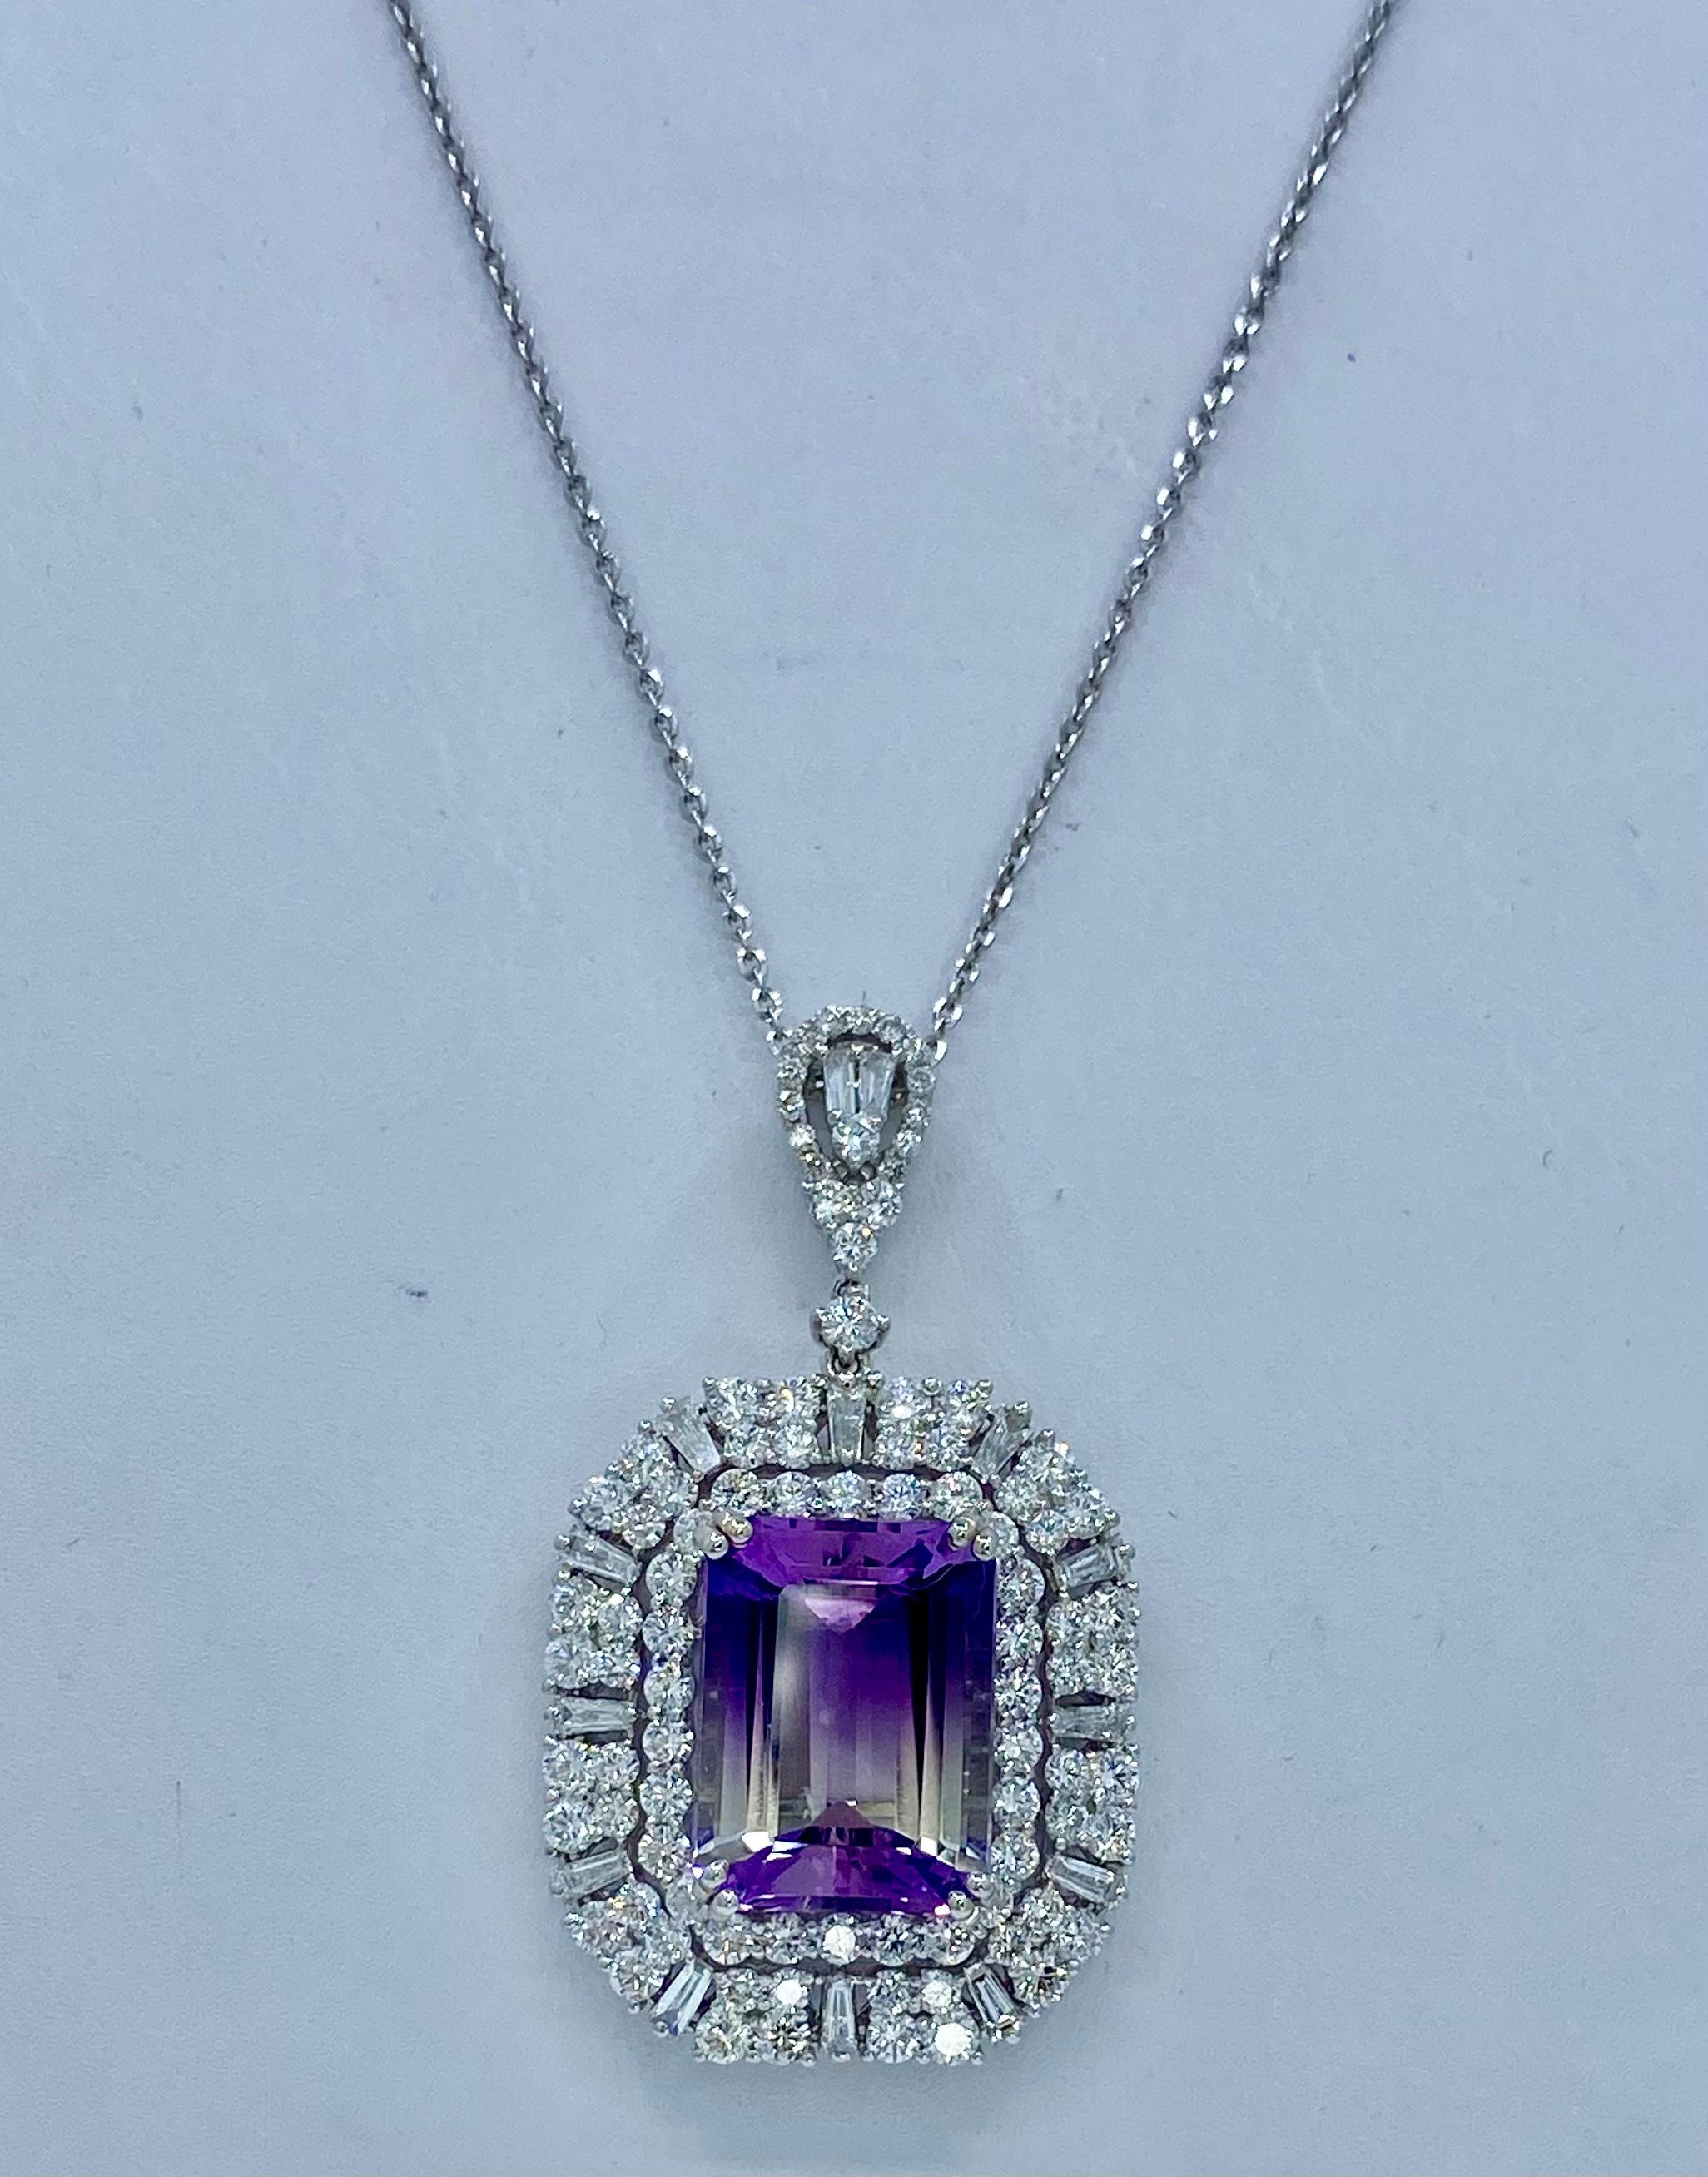 A stunning and large, emerald cut, chiaroscurro effect bi-color amethyst is talon prong set in 18 karat white gold and surrounded by a mesmerizing octagonal halo of round brilliant diamonds and then further surrounded by another octagonal halo of